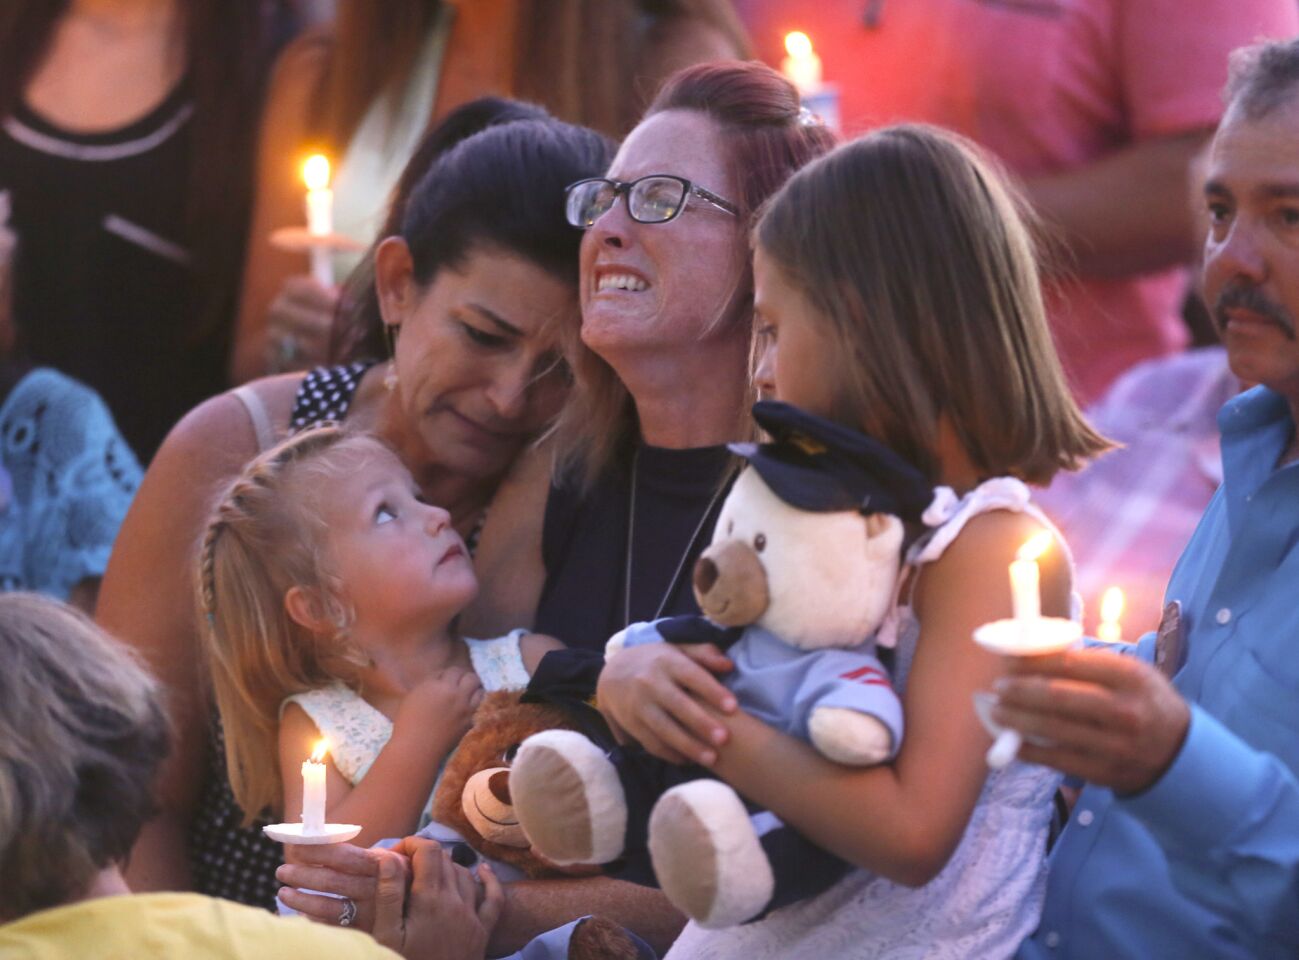 Dechia Gerald, widow of slain Baton Rouge Police Officer Matthew Gerald, weeps while she cradles her two daughters on her lap during a candlelight vigil at the Healing Place Church.